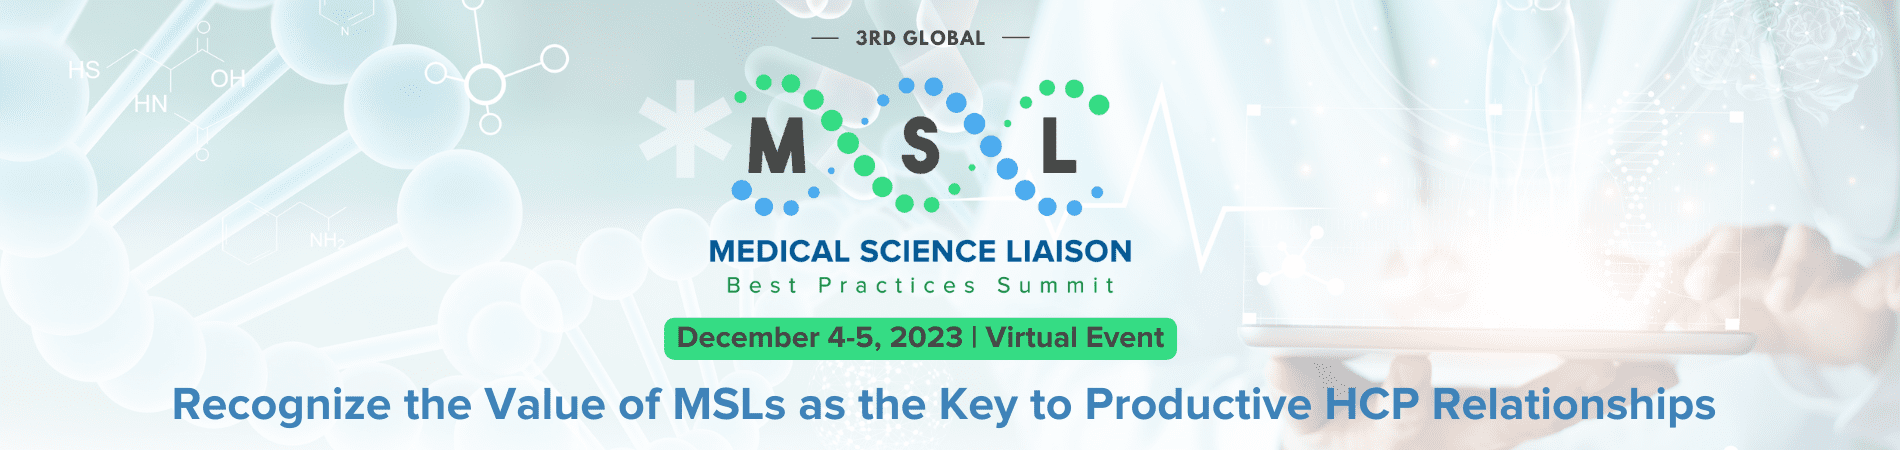 3rd Global MSL Best Practices Summit, December 4-5, recognize the value of msls as the key to productive hcp relationships